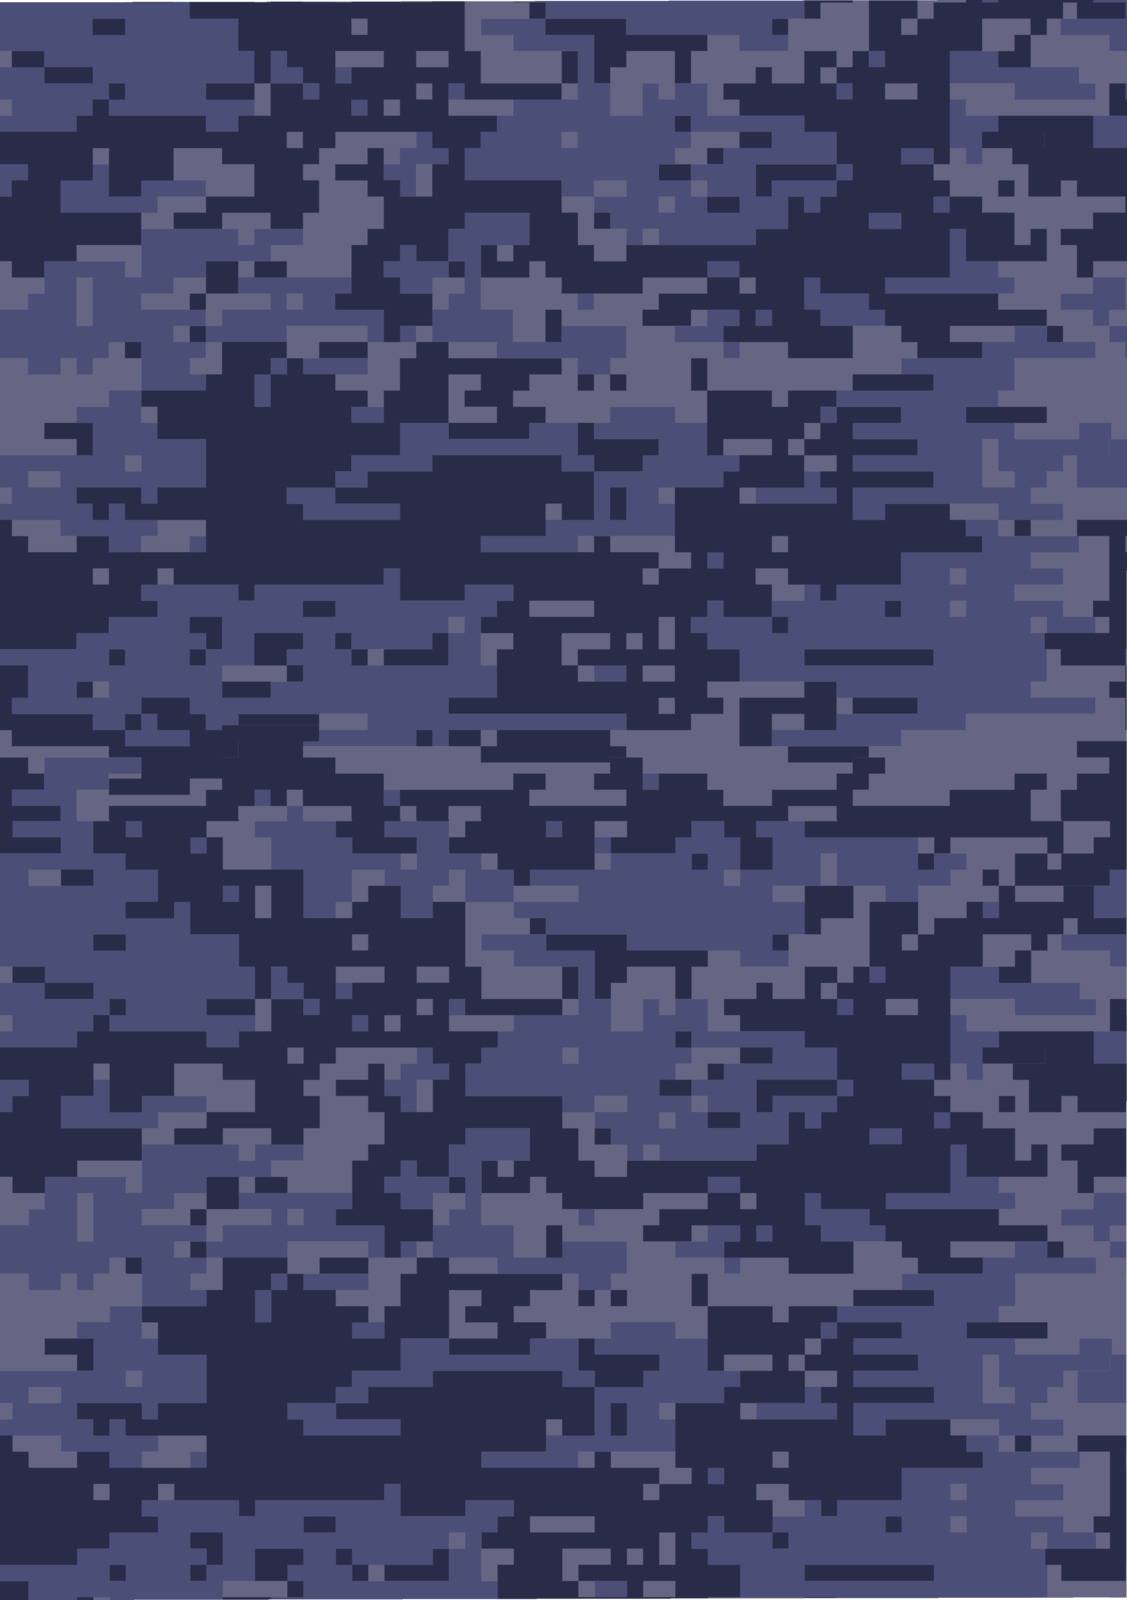 Digital dark blue military camouflage texture background by cougarsan